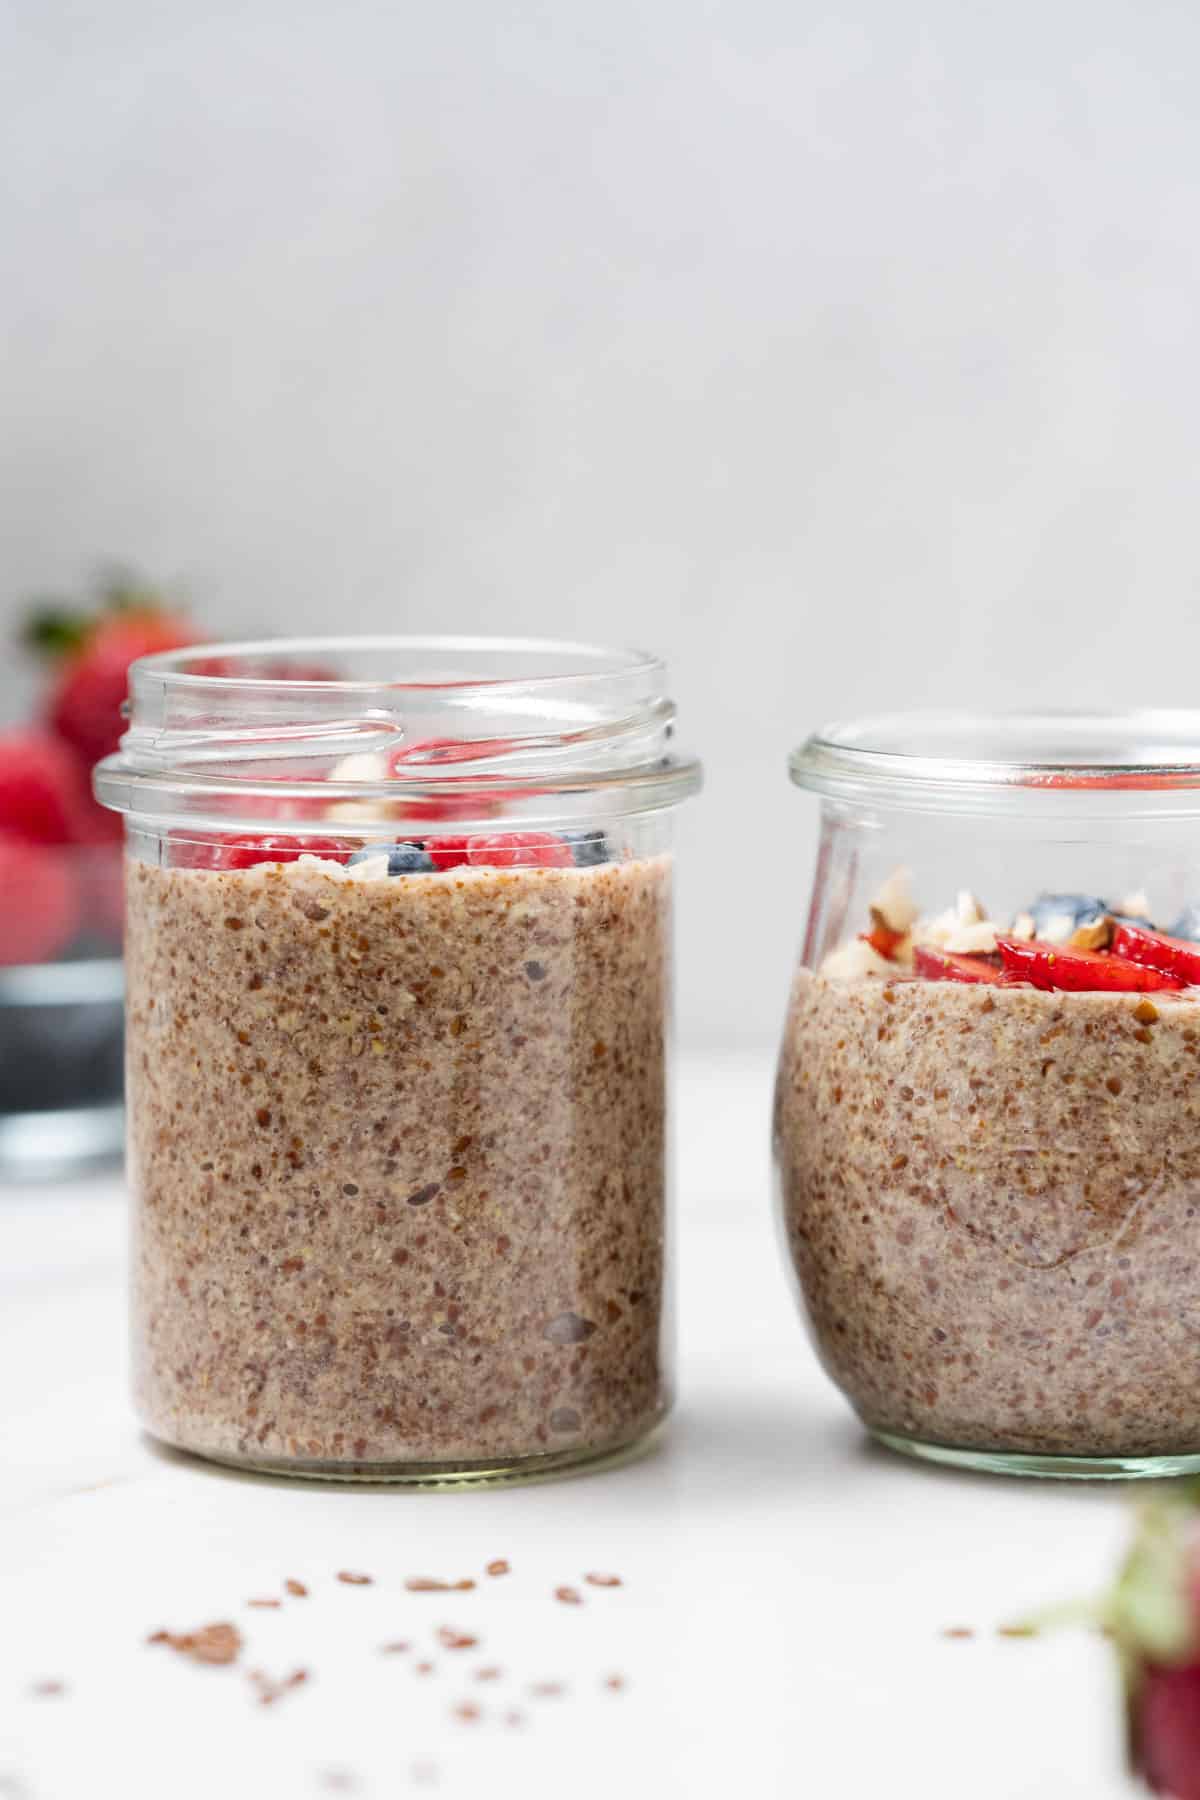 Two different jars of flaxseed pudding with diced fruit on top.